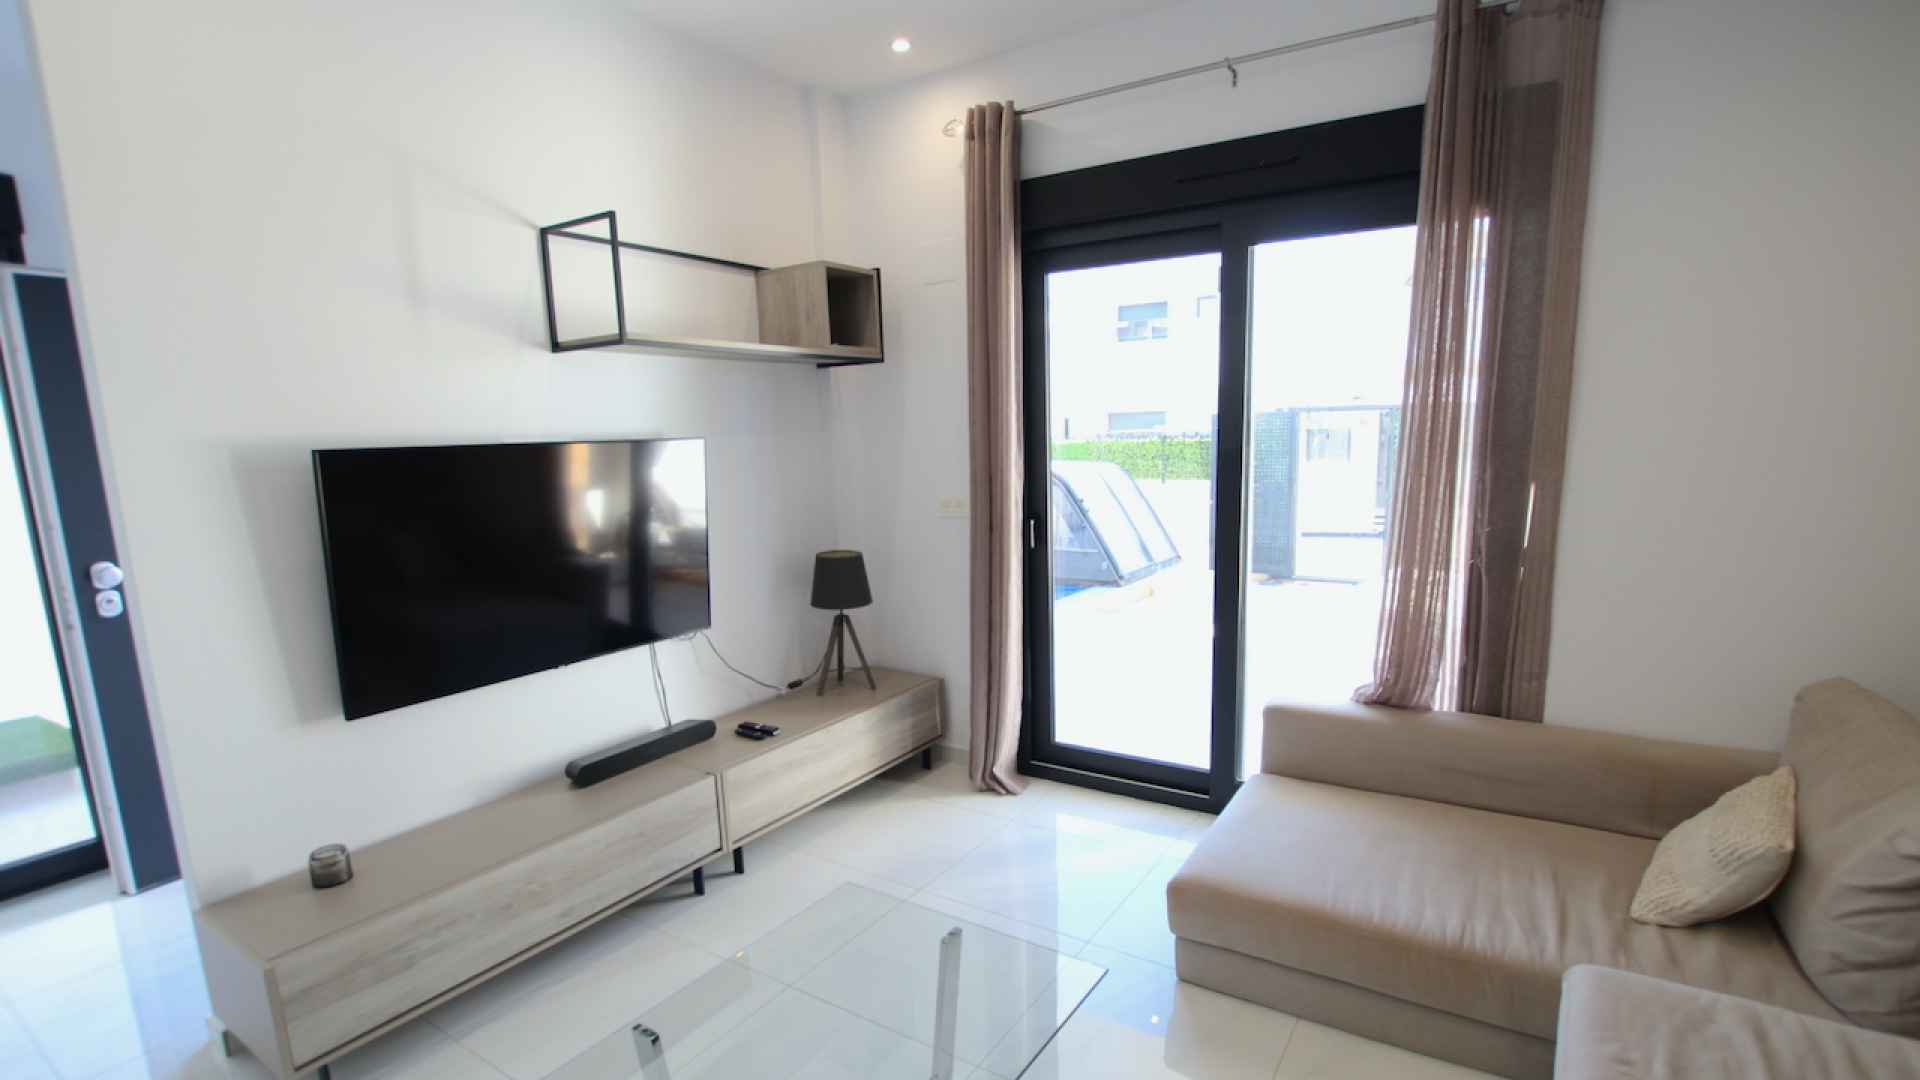 48308_stunning_3_bedroom_villa_in_a_highly_sough_after_location_201223102903_img_5054